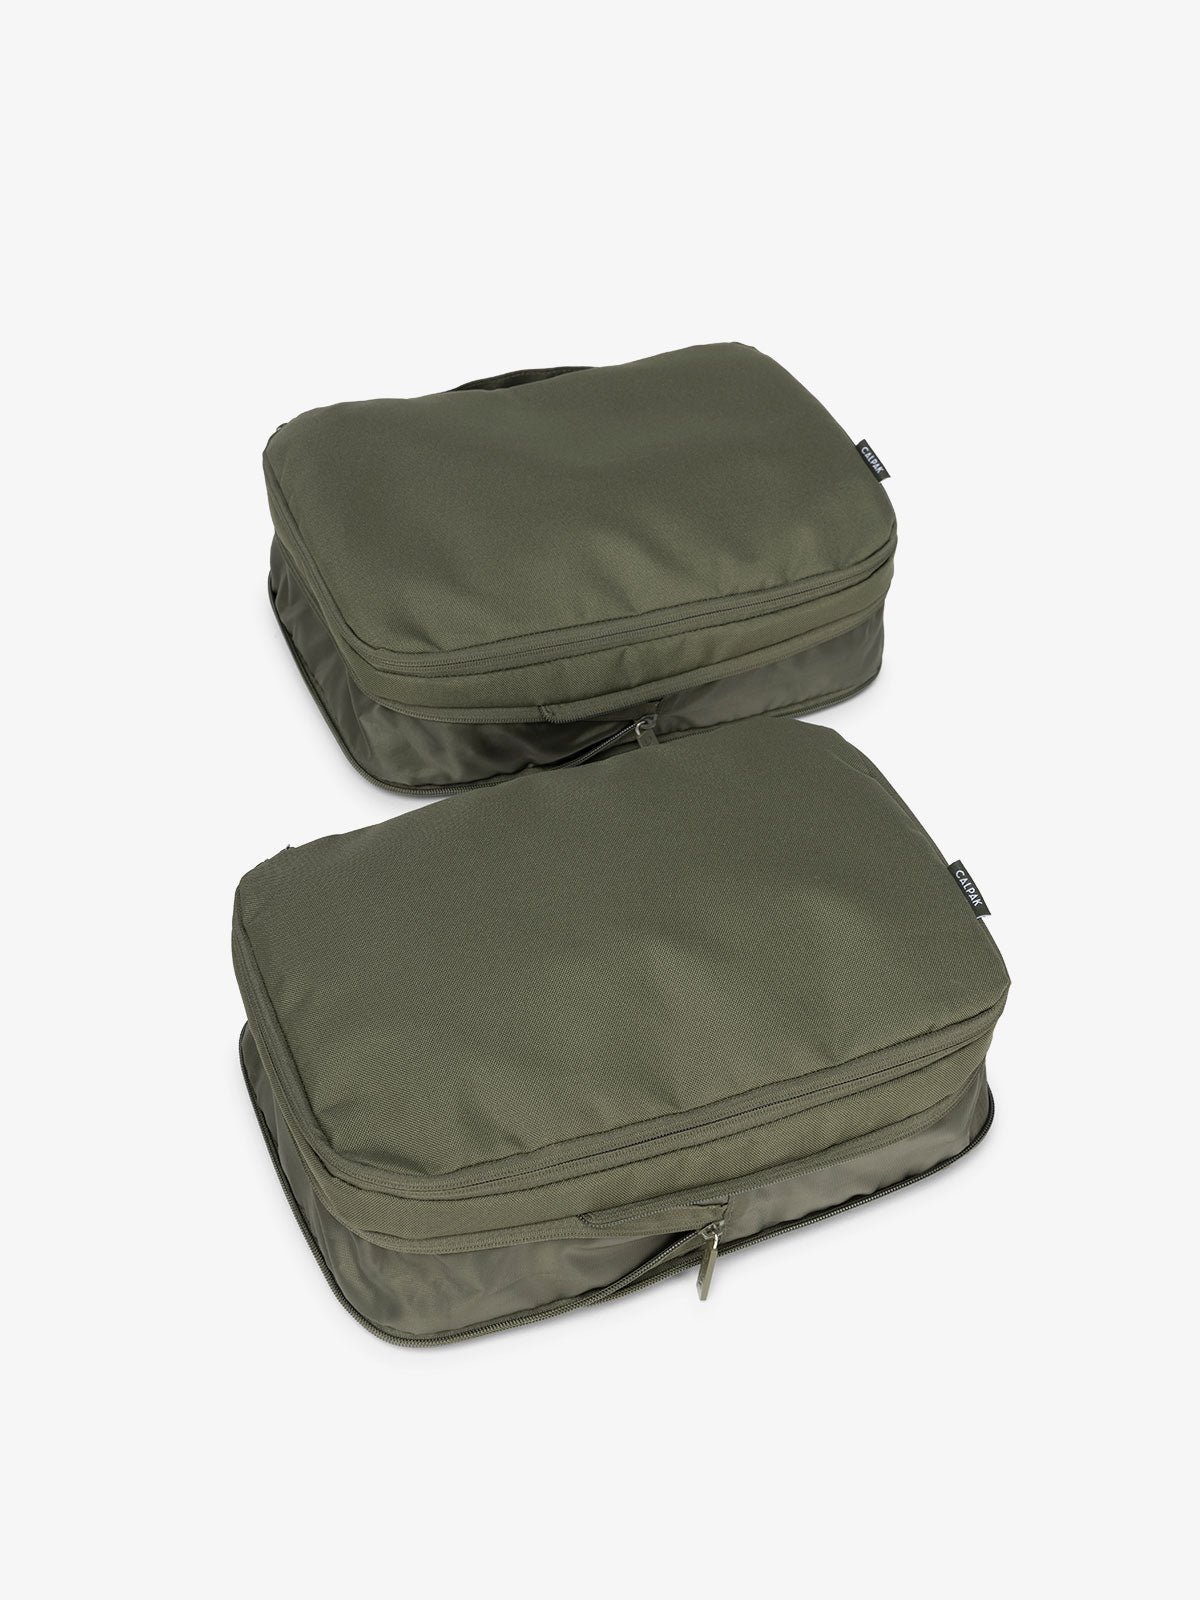 compression packing cubes for carry-on